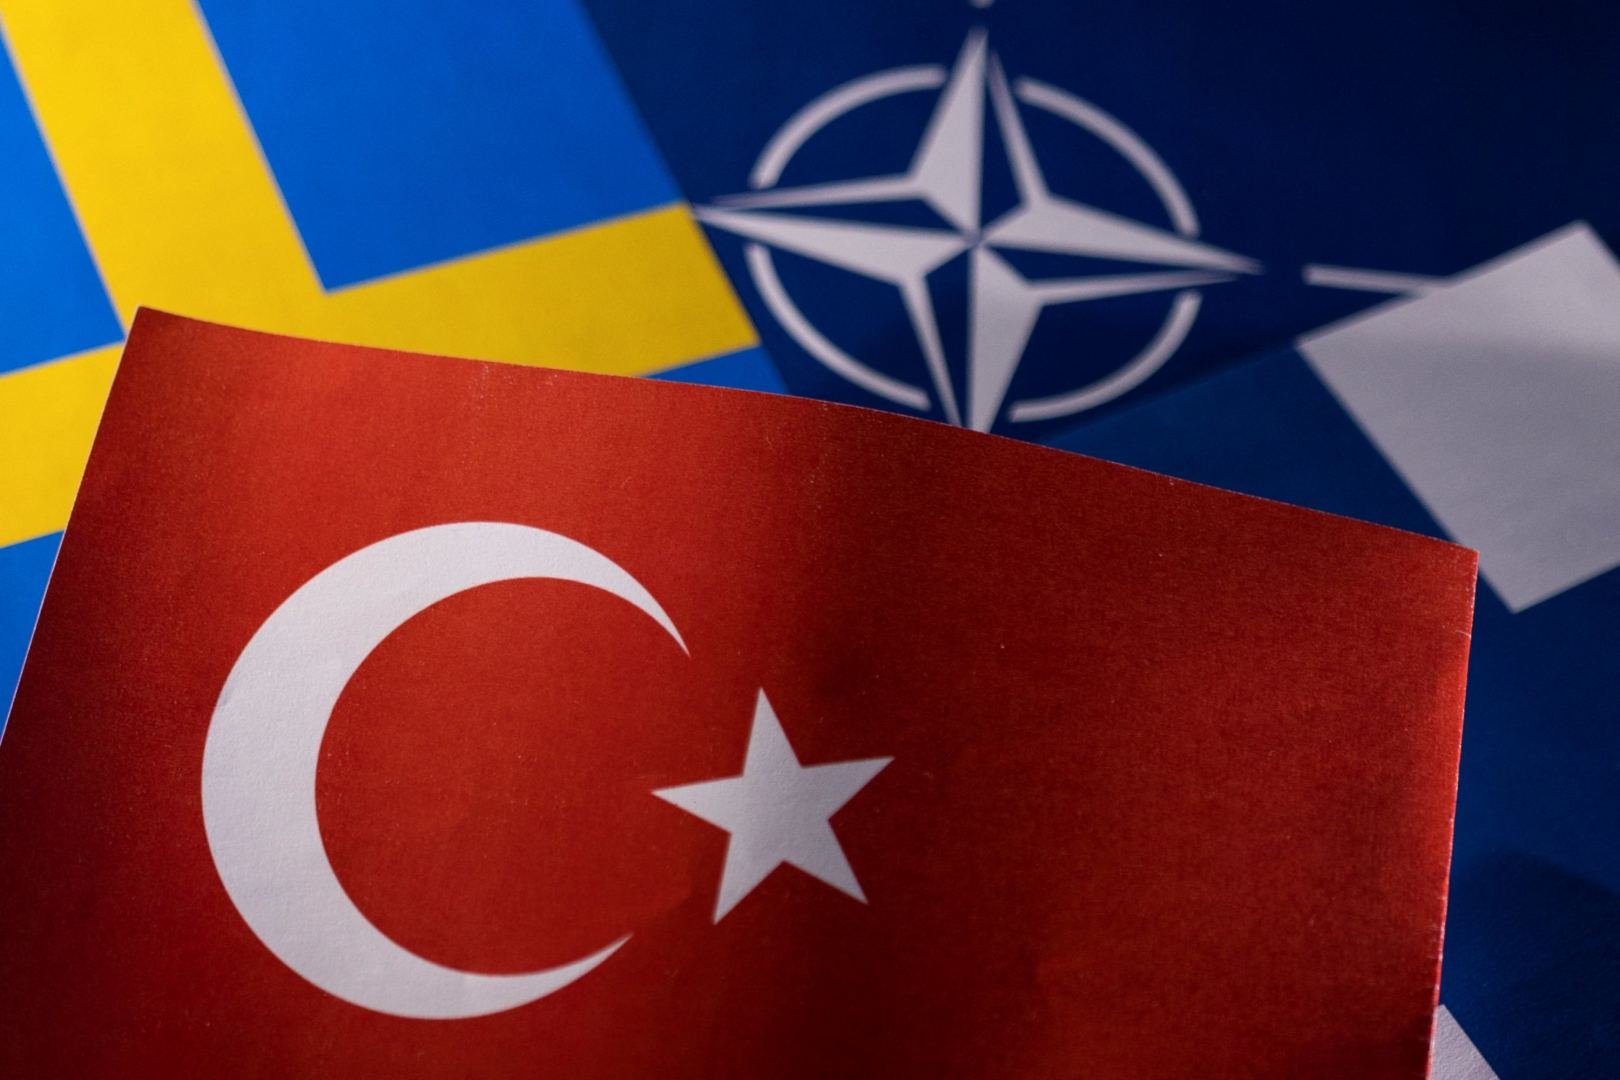 Türkiye agrees to submit protocol on Sweden's accession to NATO for ratification